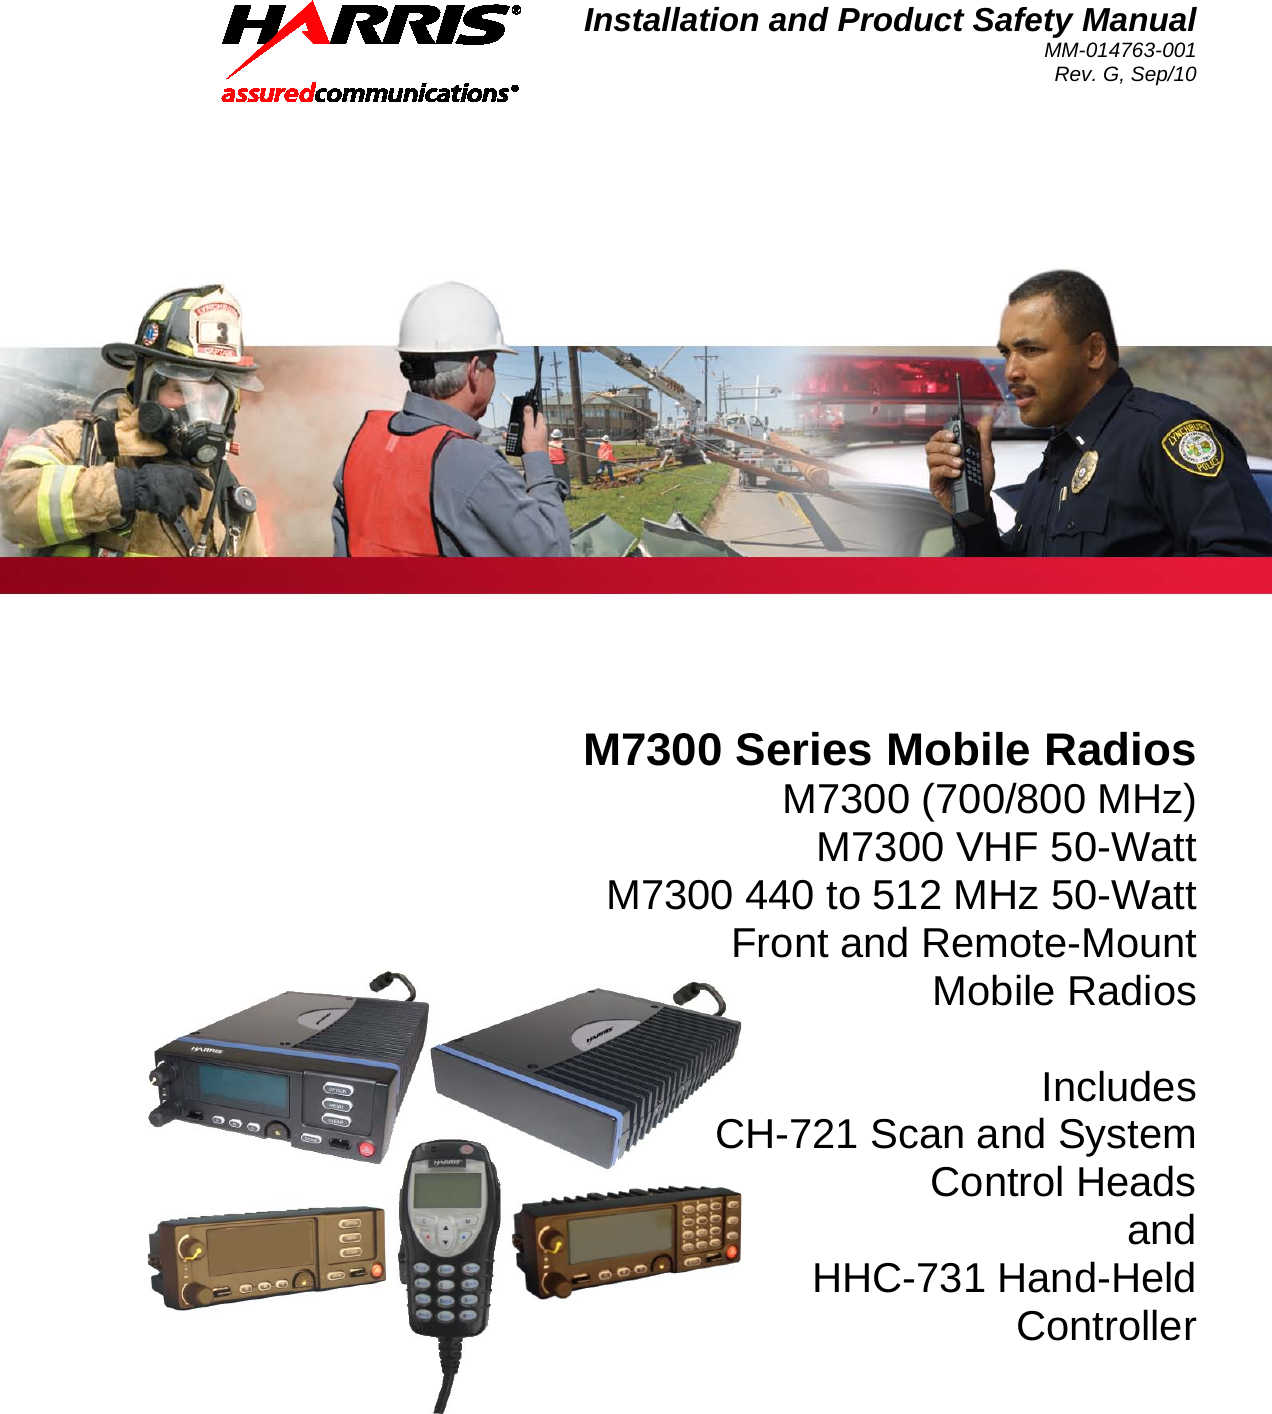 Installation and Product Safety Manual MM-014763-001 Rev. G, Sep/10   M7300 Series Mobile Radios M7300 (700/800 MHz) M7300 VHF 50-Watt M7300 440 to 512 MHz 50-Watt Front and Remote-Mount Mobile Radios  Includes CH-721 Scan and System Control Heads and HHC-731 Hand-Held Controller  